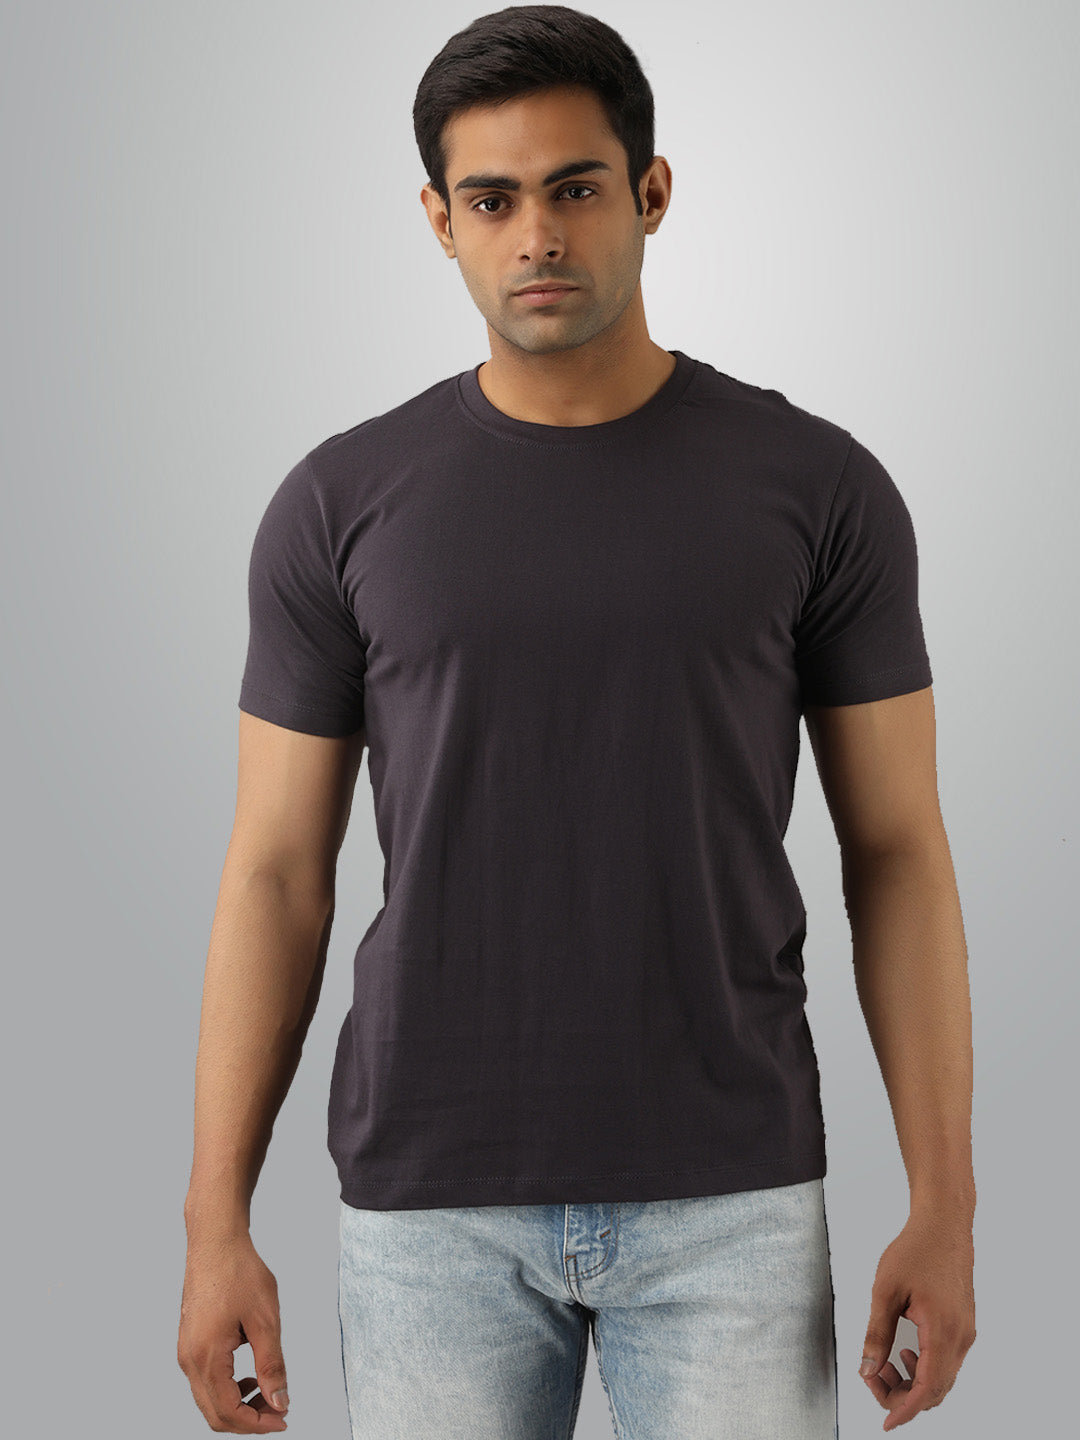 PLAIN HALF SLEEVES PACK OF TWO GREY AND WHITE T-SHIRTS